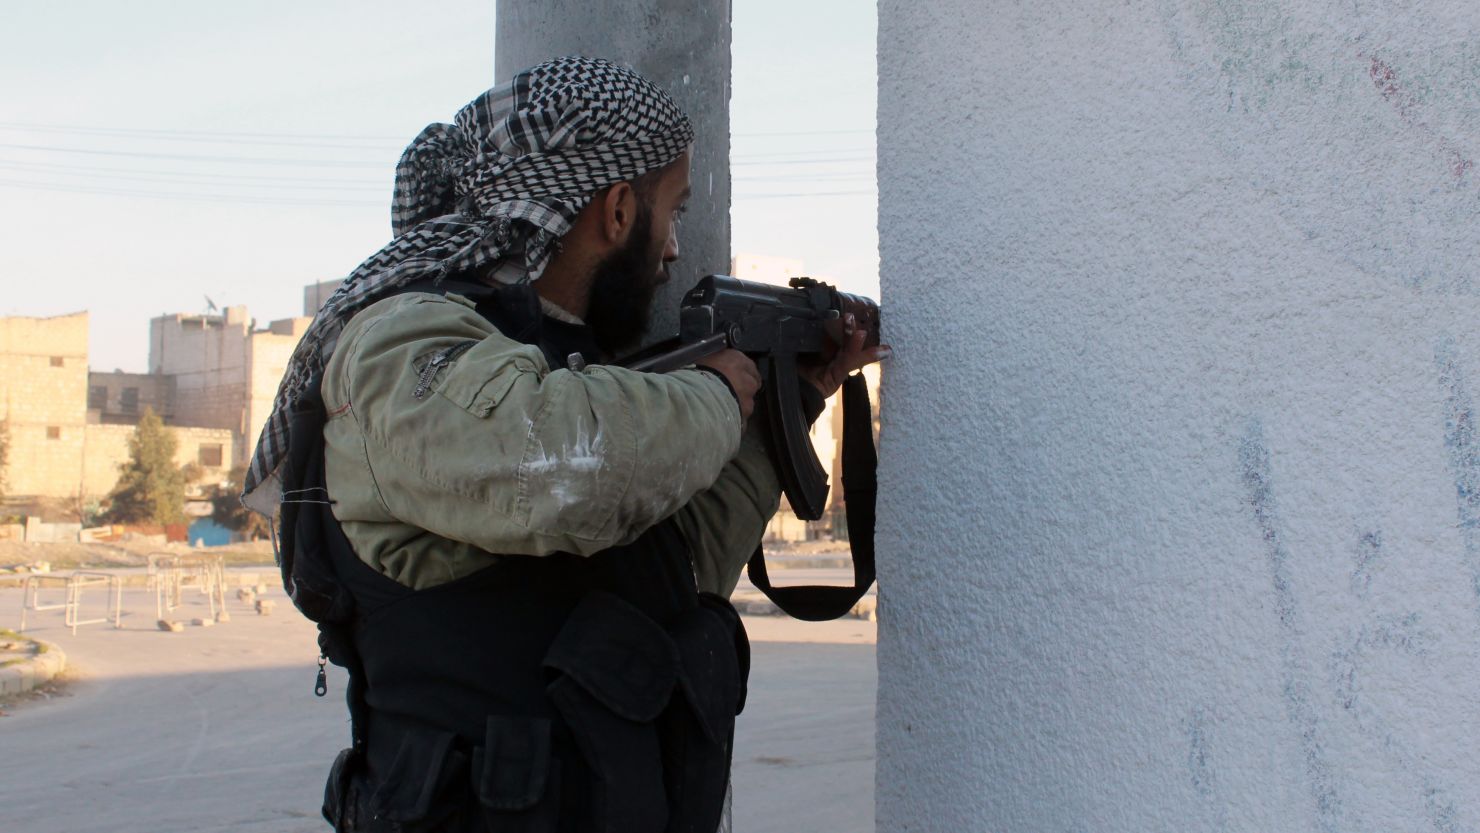 An opposition fighter guards a position in the northern Syrian city of Aleppo on January 7, 2014.